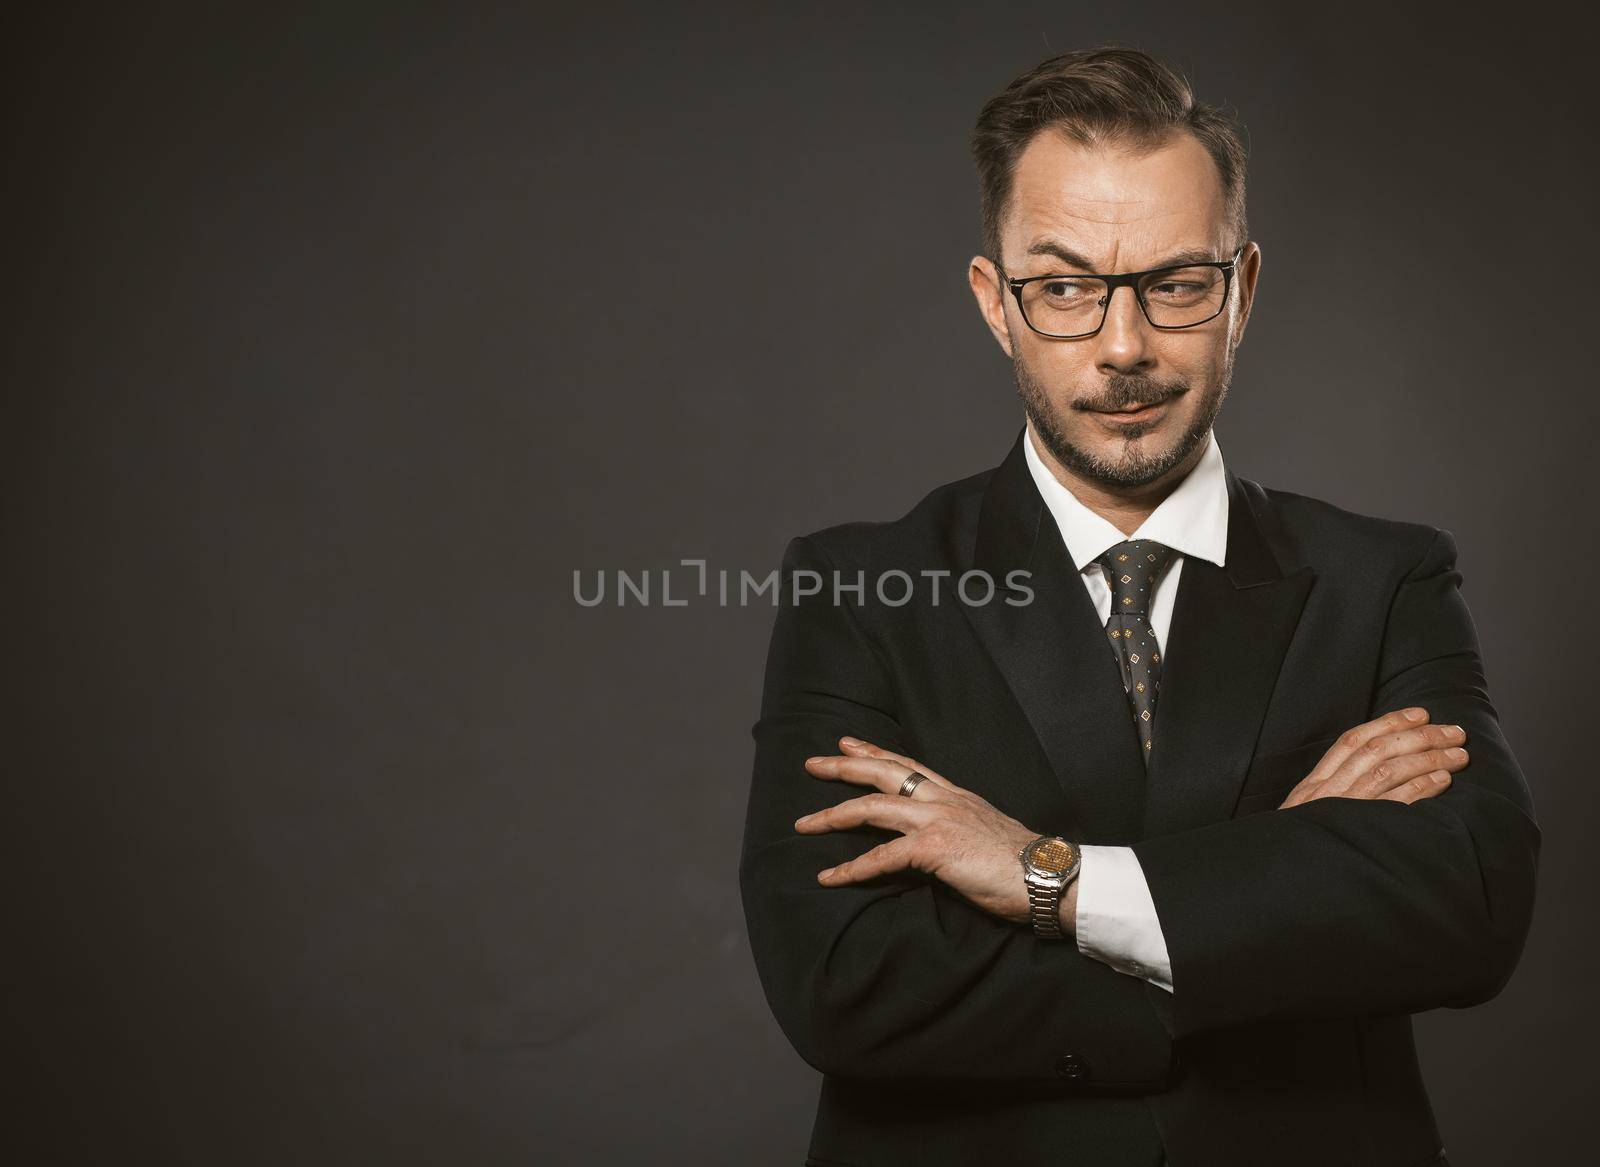 Confident businessman cunningly looks away with his arms crossed. Caucasian middle-aged man standing against a gray wall with copyspace or space for text on the left. Toned image.